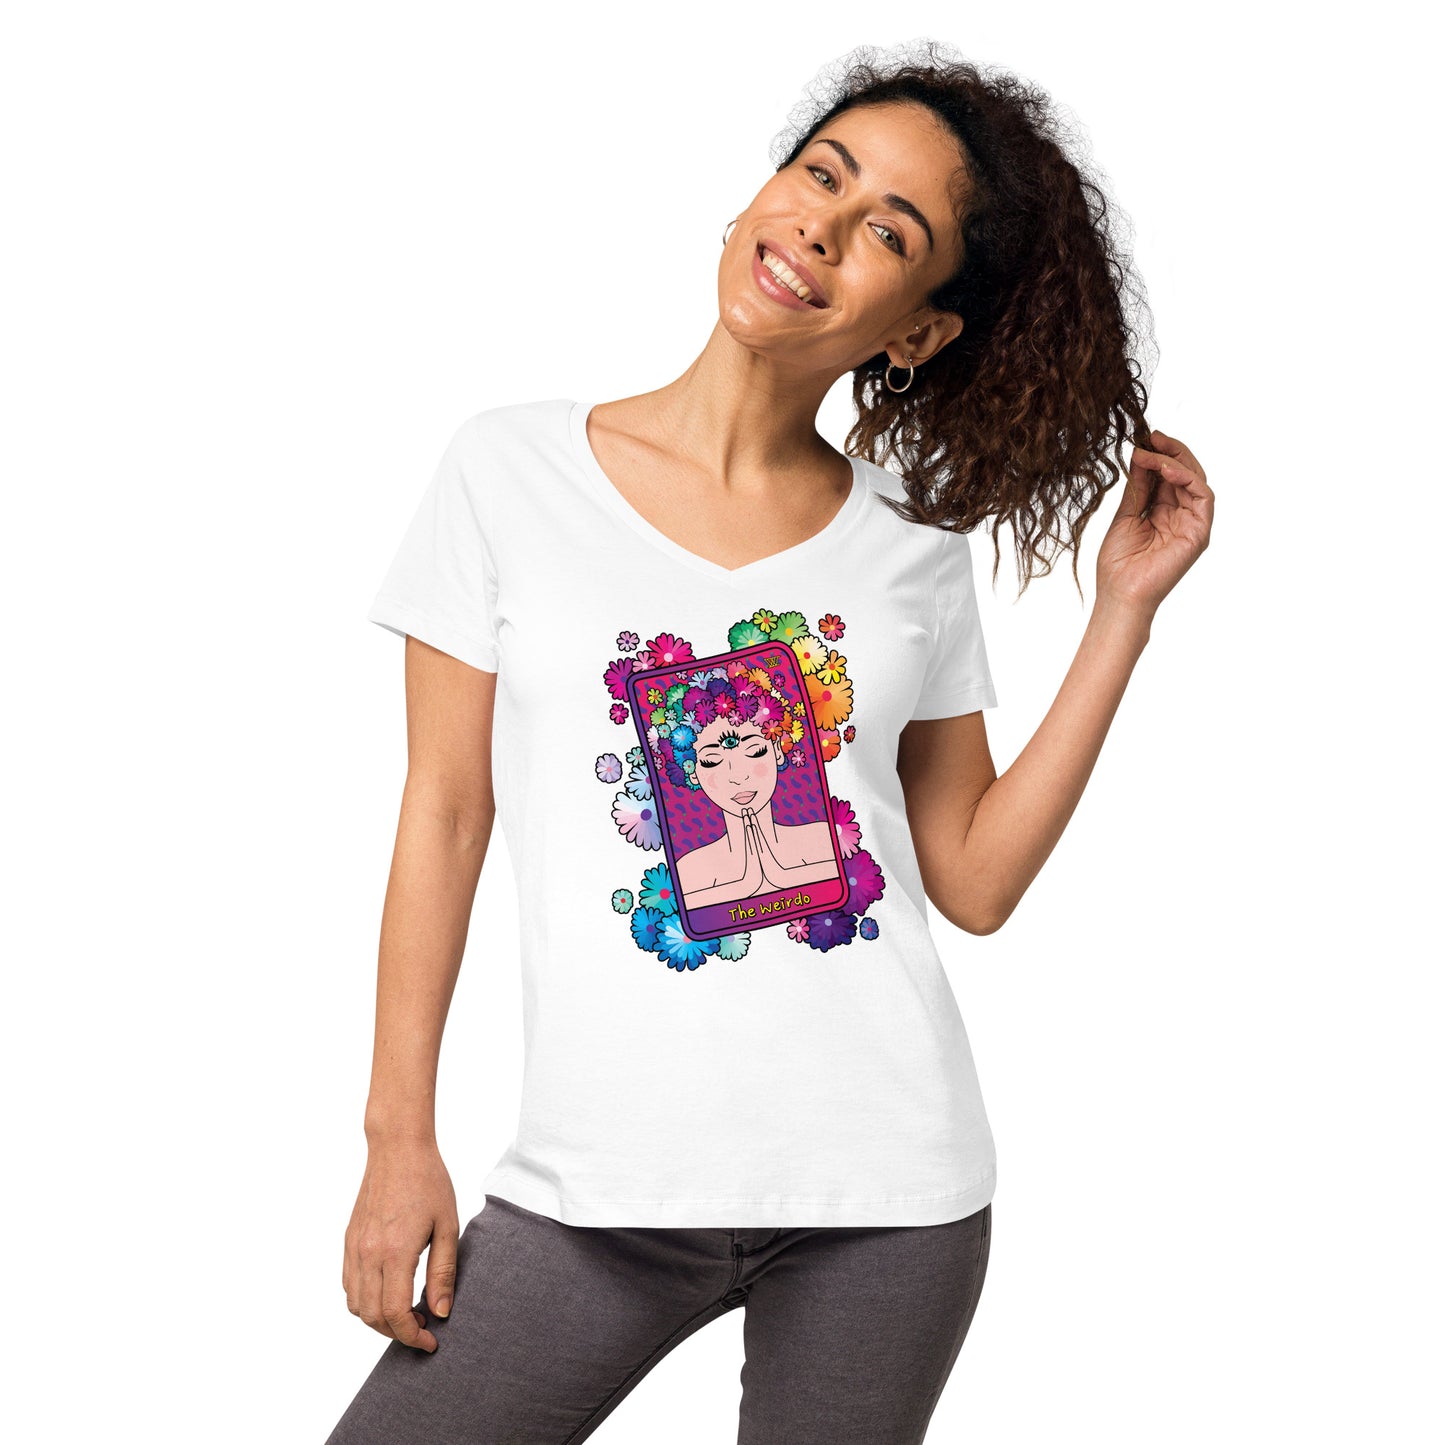 #WEIRDO | Special design for you spiritual weirdos out there! This V-neck T-shirt has 'The Weirdo' tarot card printed at the front. Love this when you love spirituality.